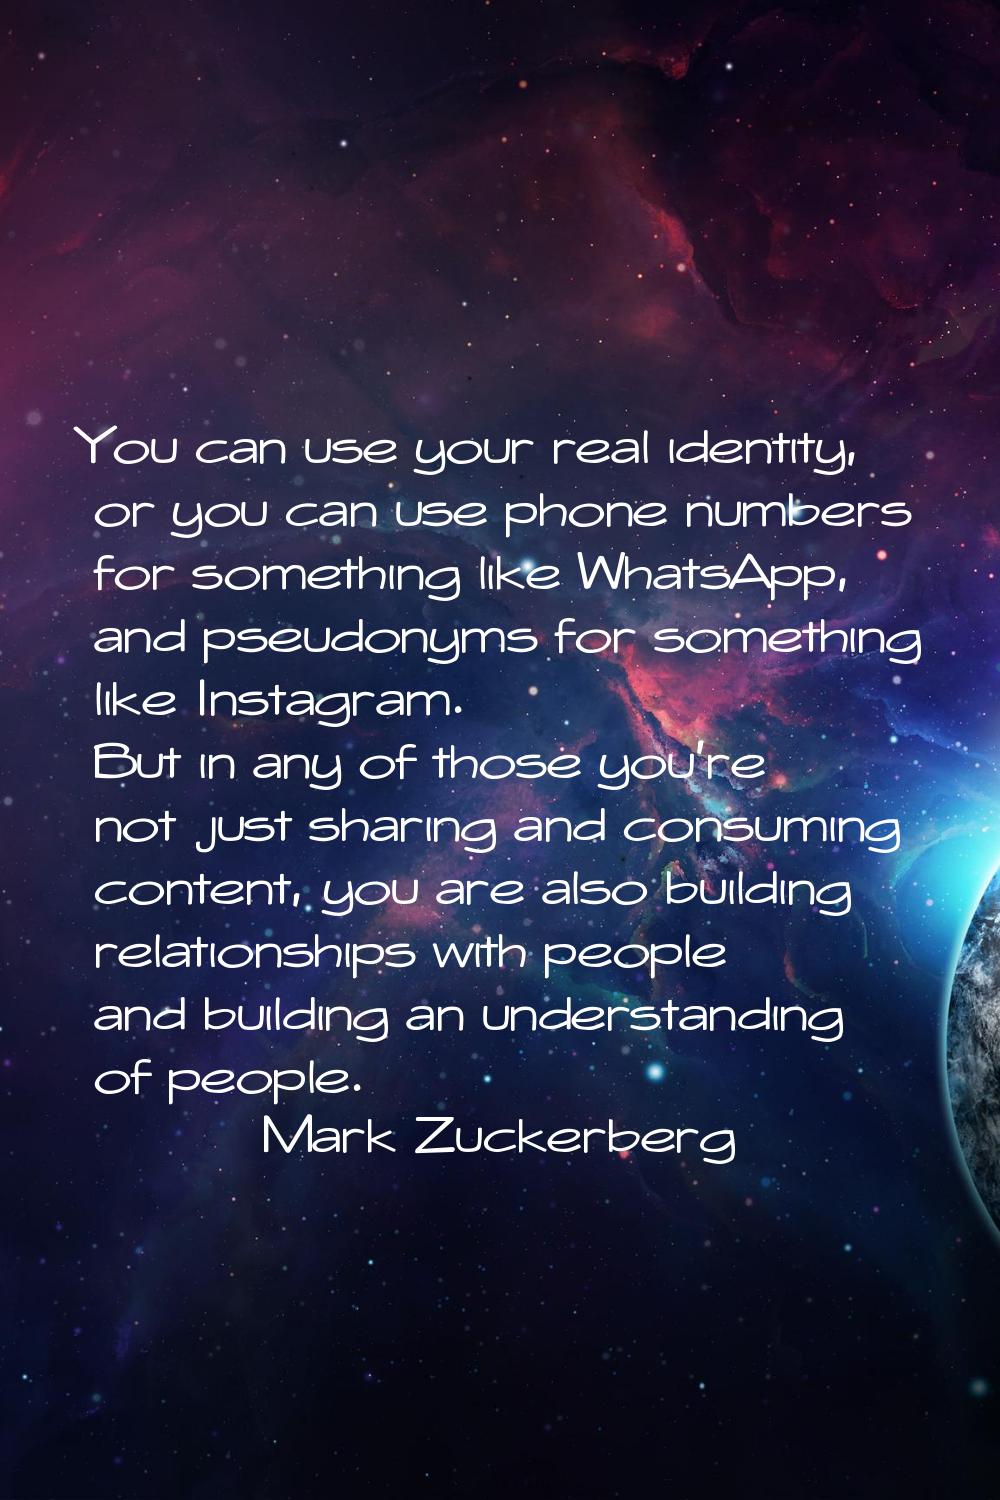 You can use your real identity, or you can use phone numbers for something like WhatsApp, and pseud